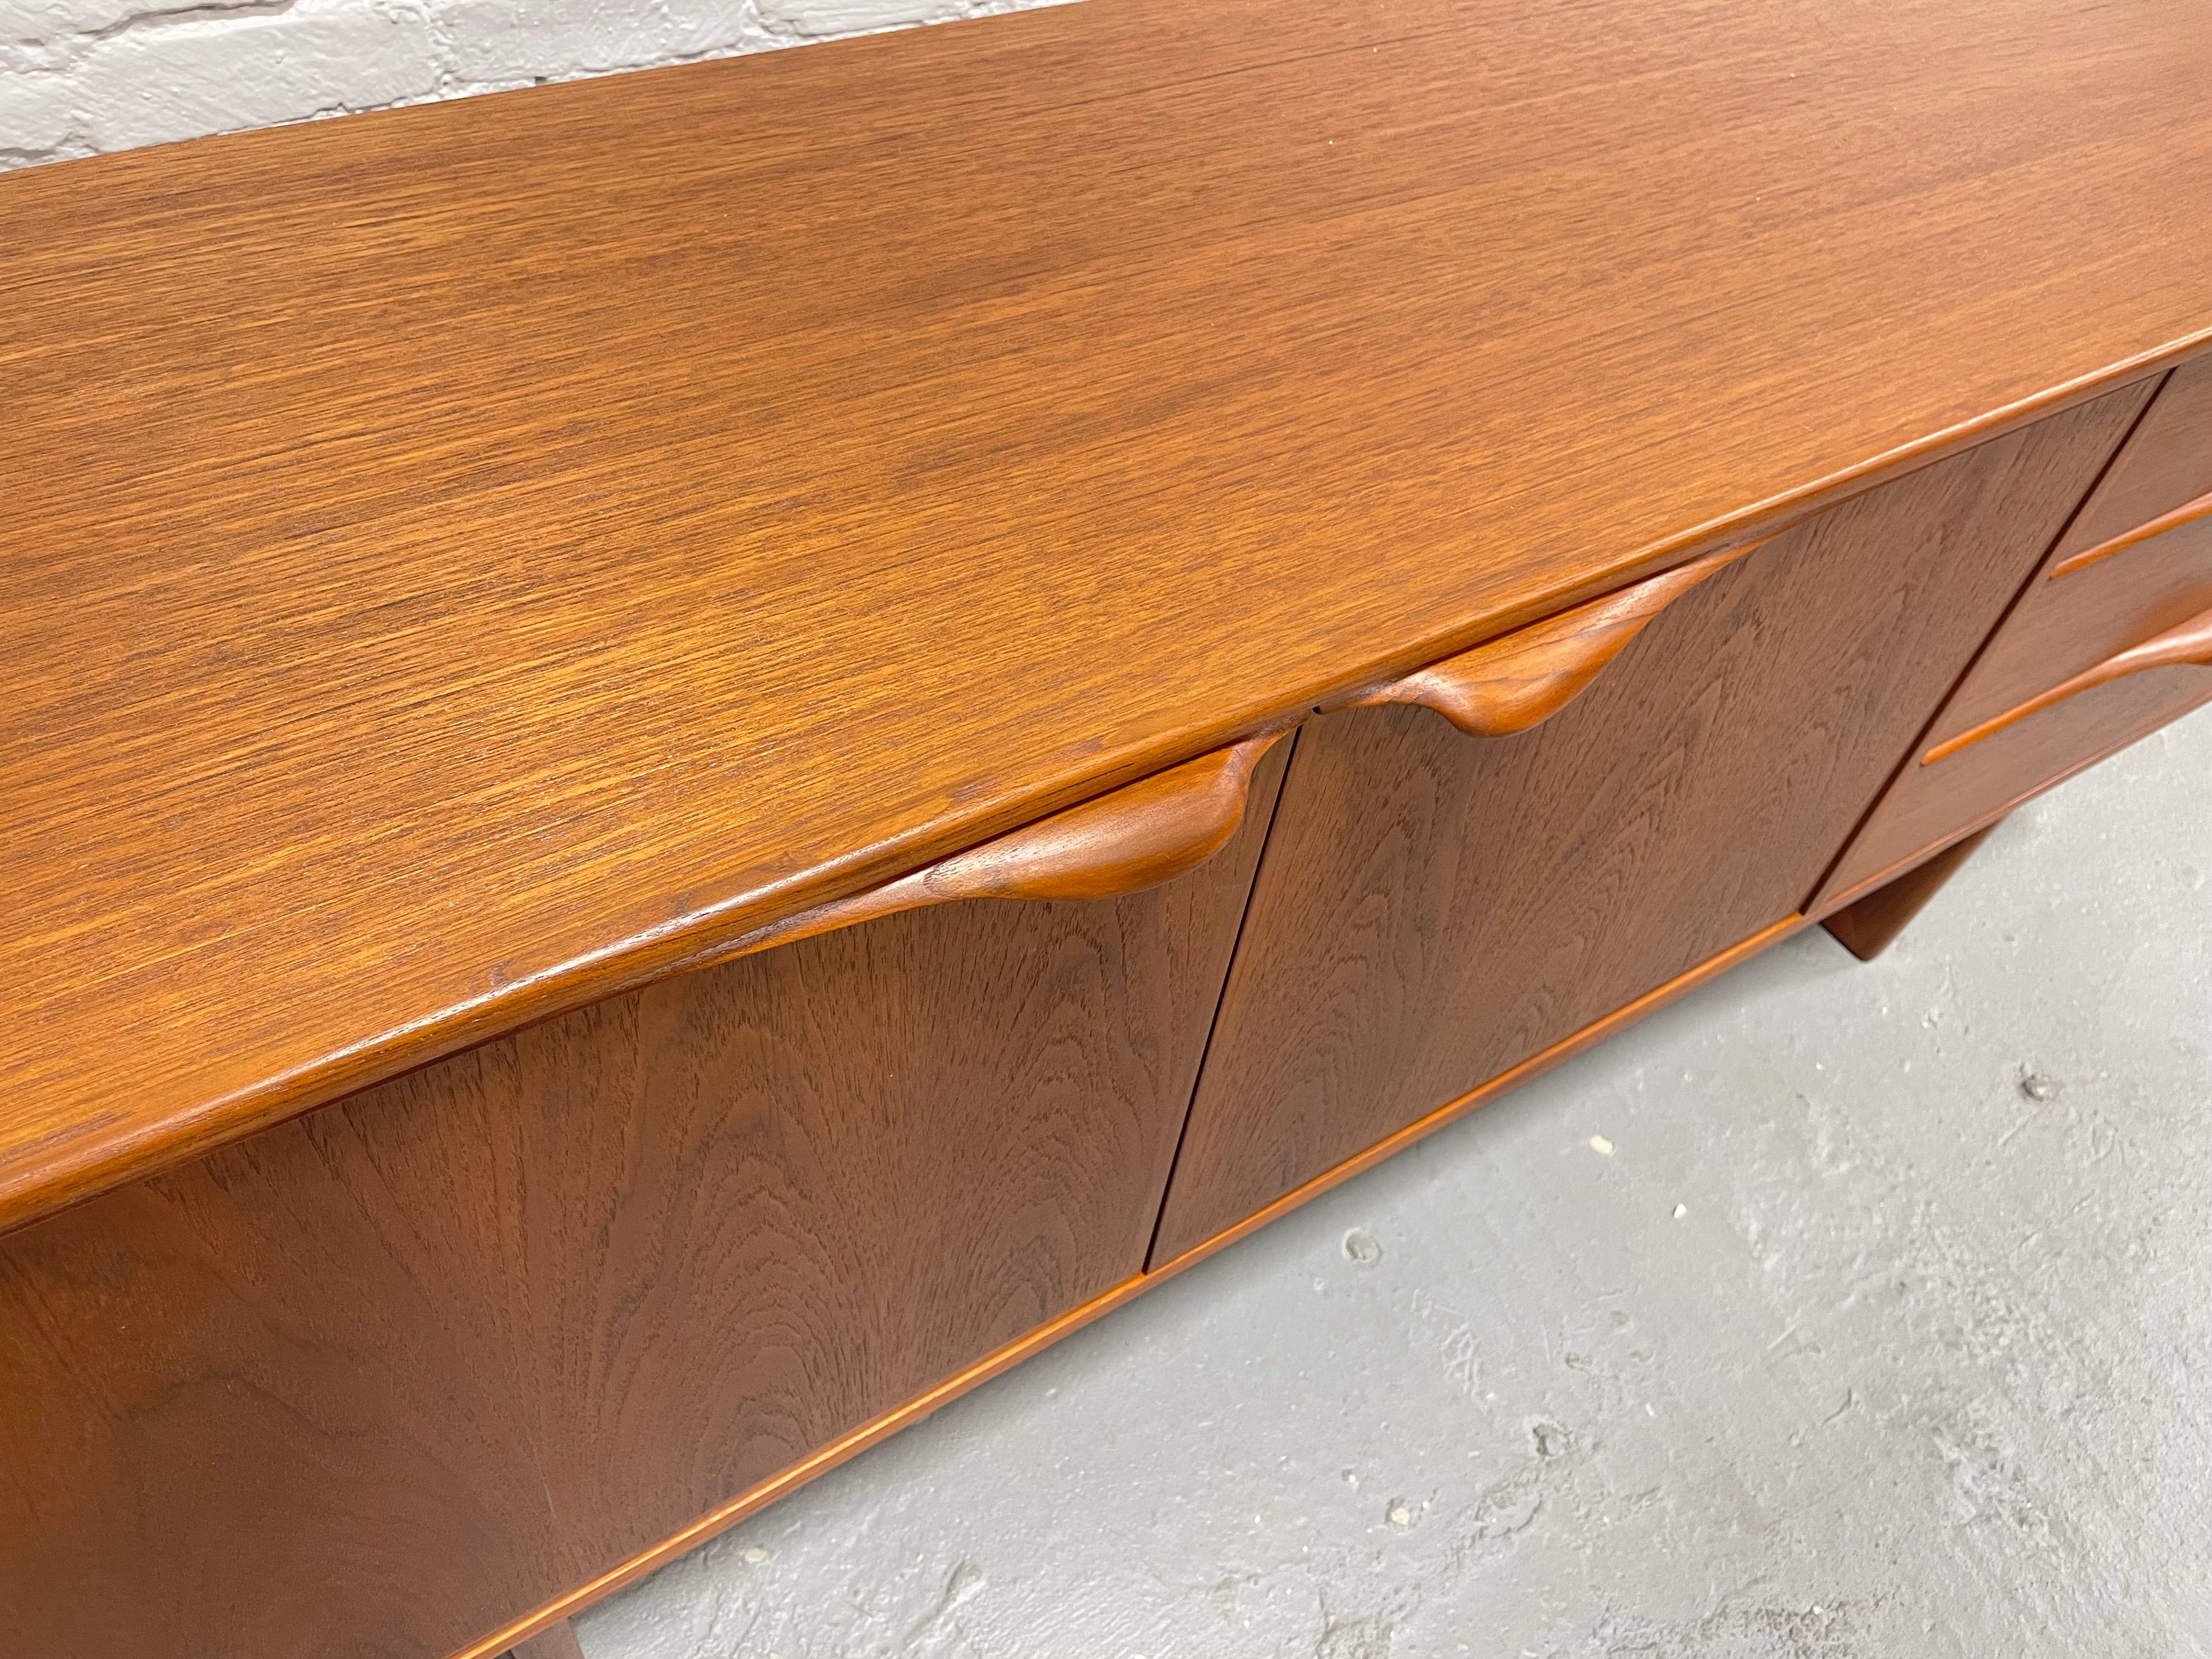 SCULPTED Mid Century Modern Danish styled CREDENZA media stand